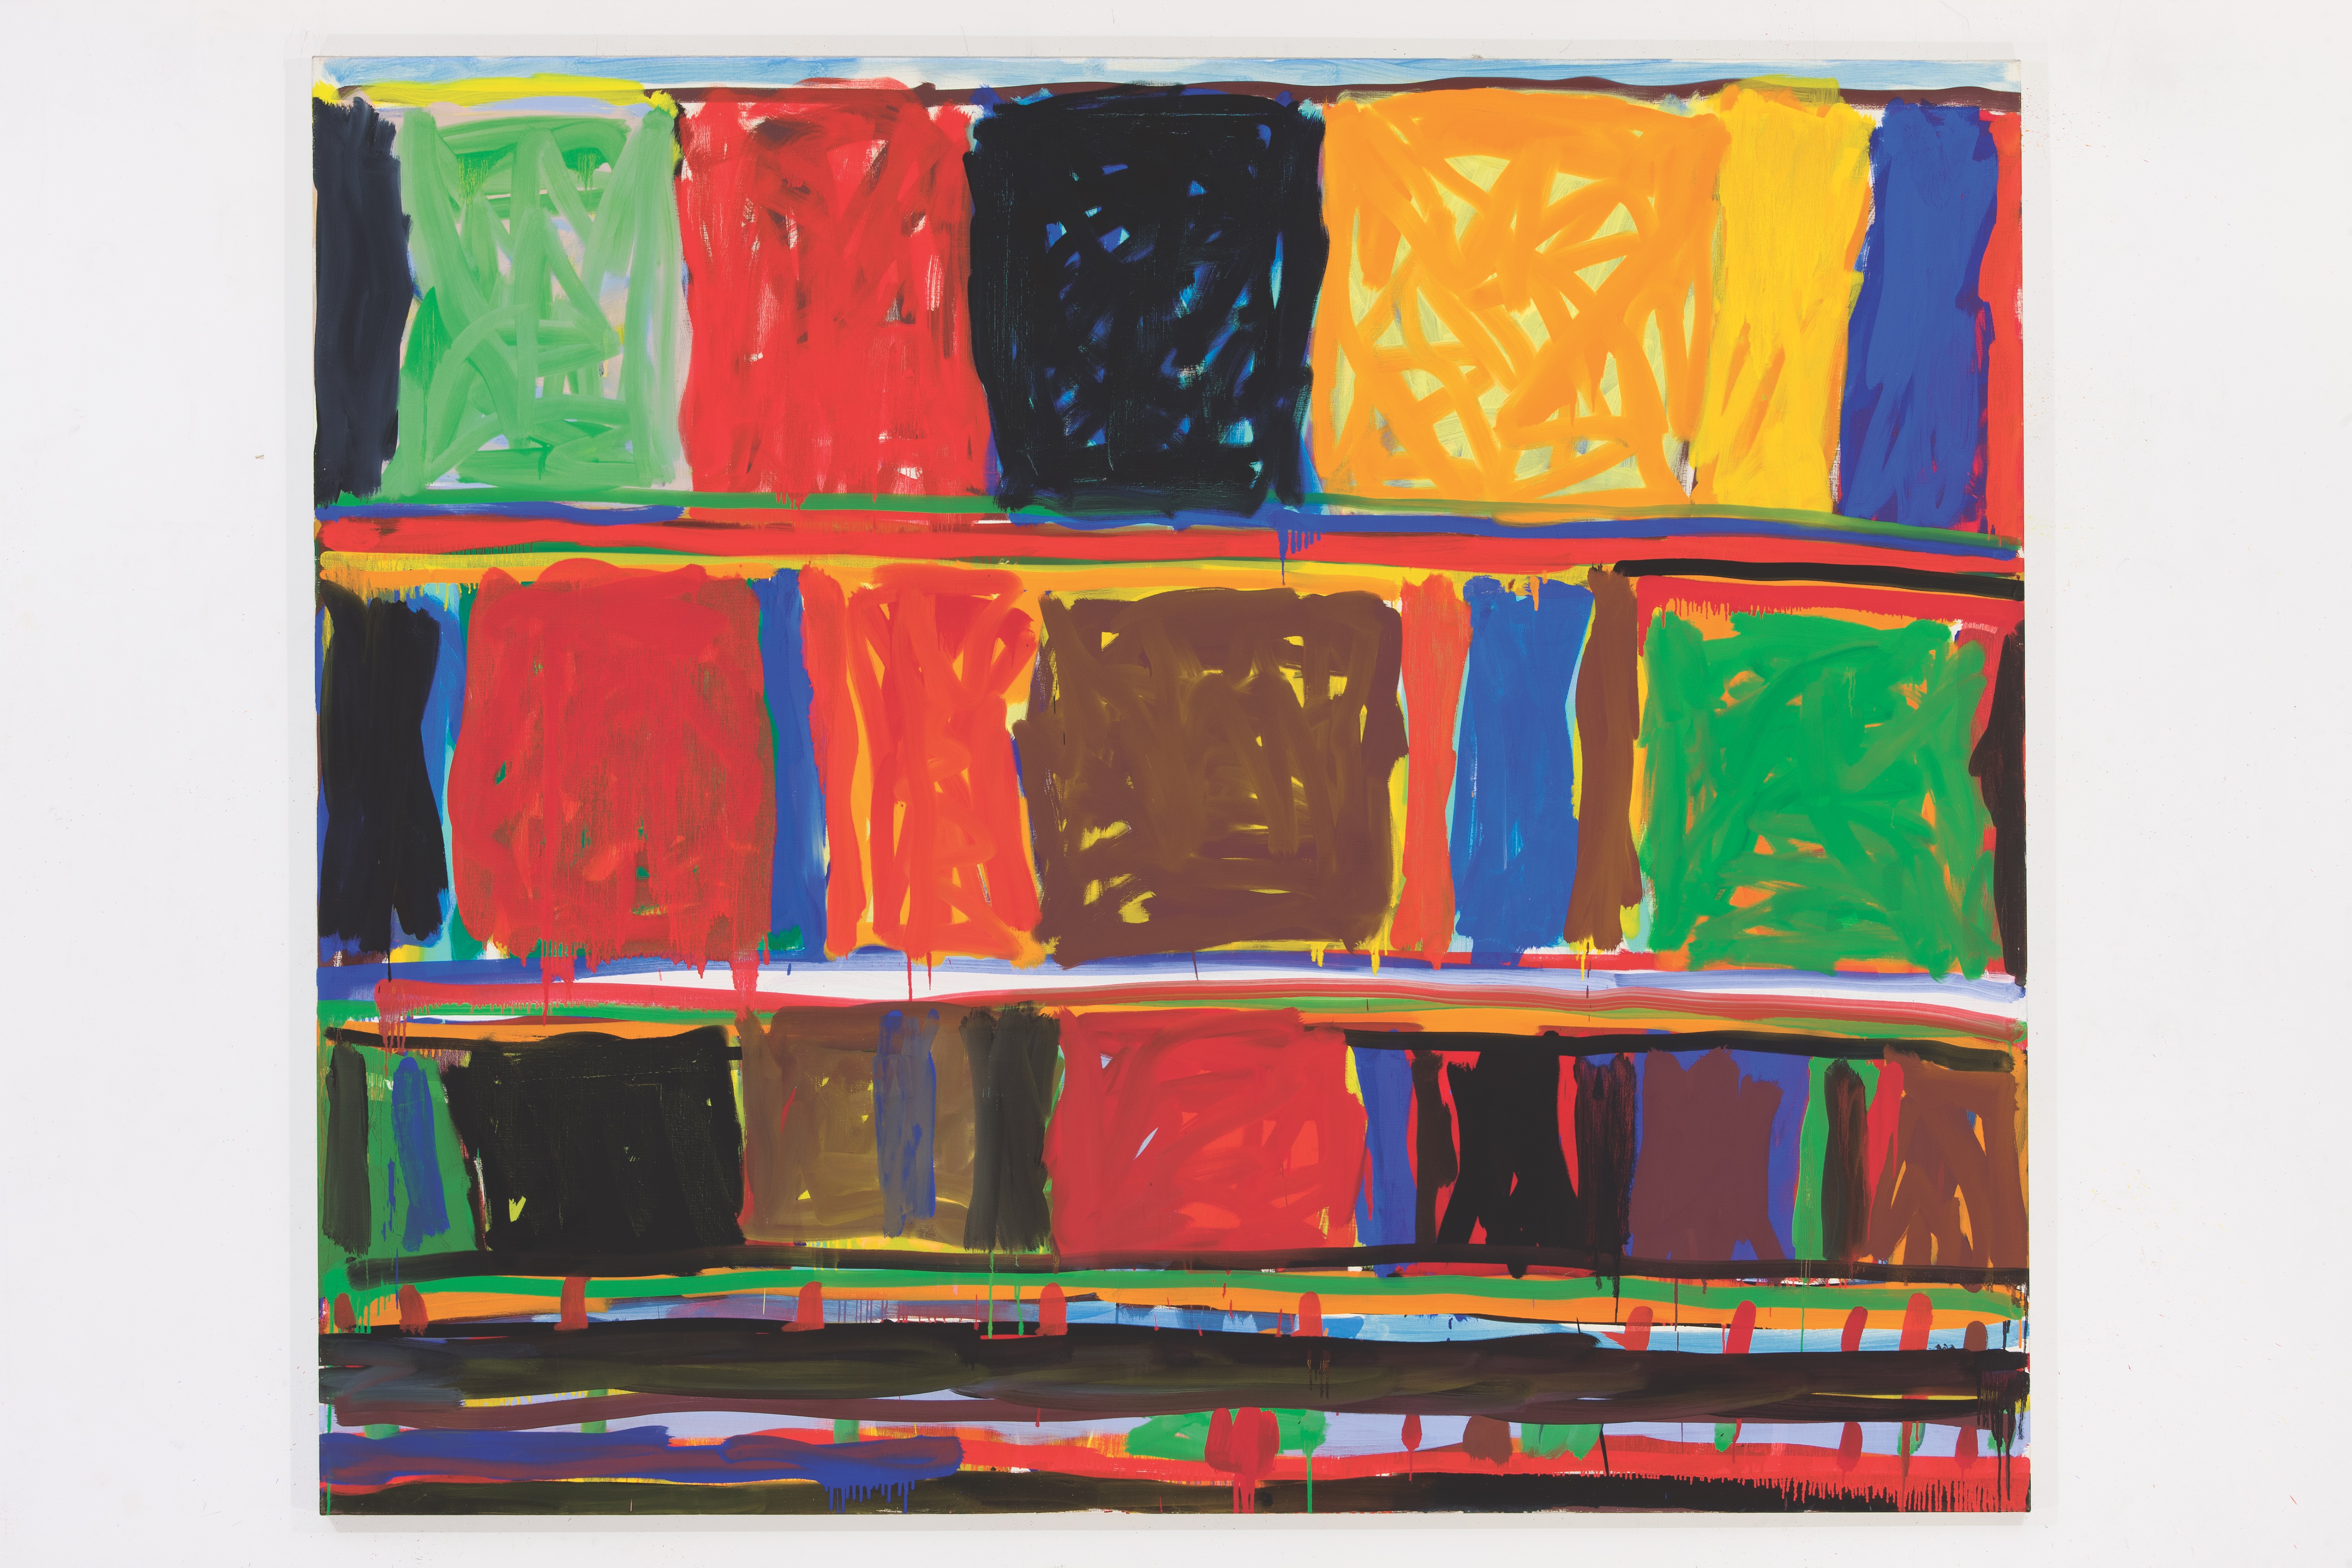 A  painting comprises rough circles of varying colors presented on a loose pattern of horizontal lines